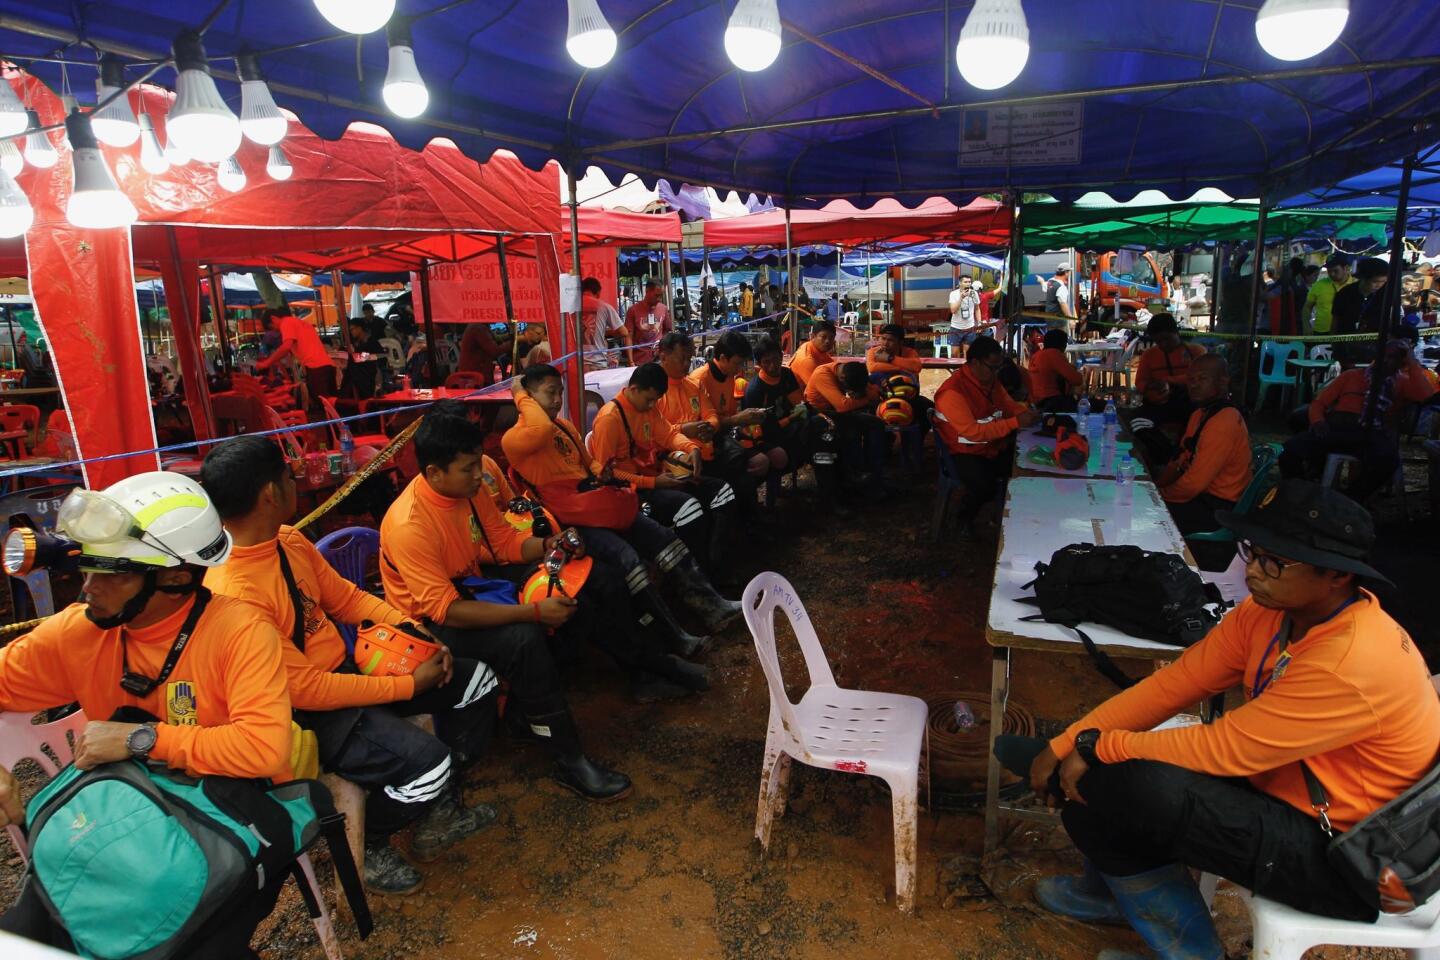 Thai civil defense volunteers prepare to join the rescue operation for the 12 trapped boys and their coach Sunday at Tham Luang cave.